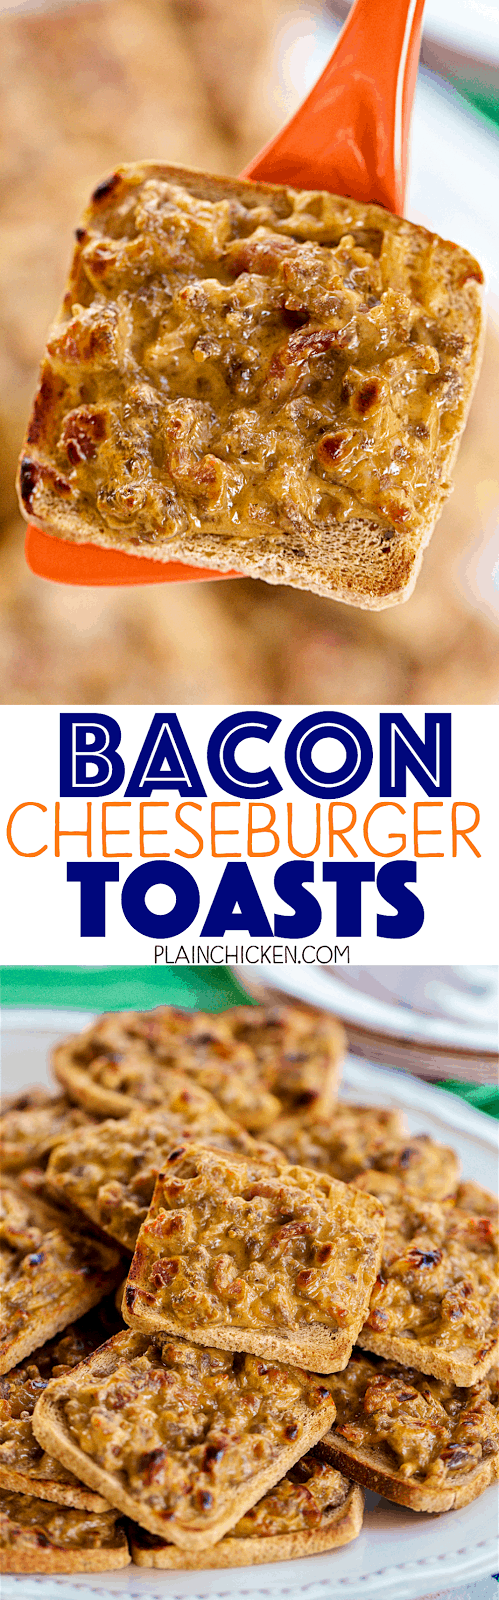 Bacon Cheeseburger Toasts - SO good!!! We love these for parties and a quick lunch or dinner. Only 5 ingredients and ready in minutes! Hamburger, bacon, worcestershire sauce and Velveeta cheese on top of party rye bread. YUM! Can make ahead and freeze for later. I always have a batch in the freezer. SO quick, easy and delicious!!! EVERYONE LOVES these!!!